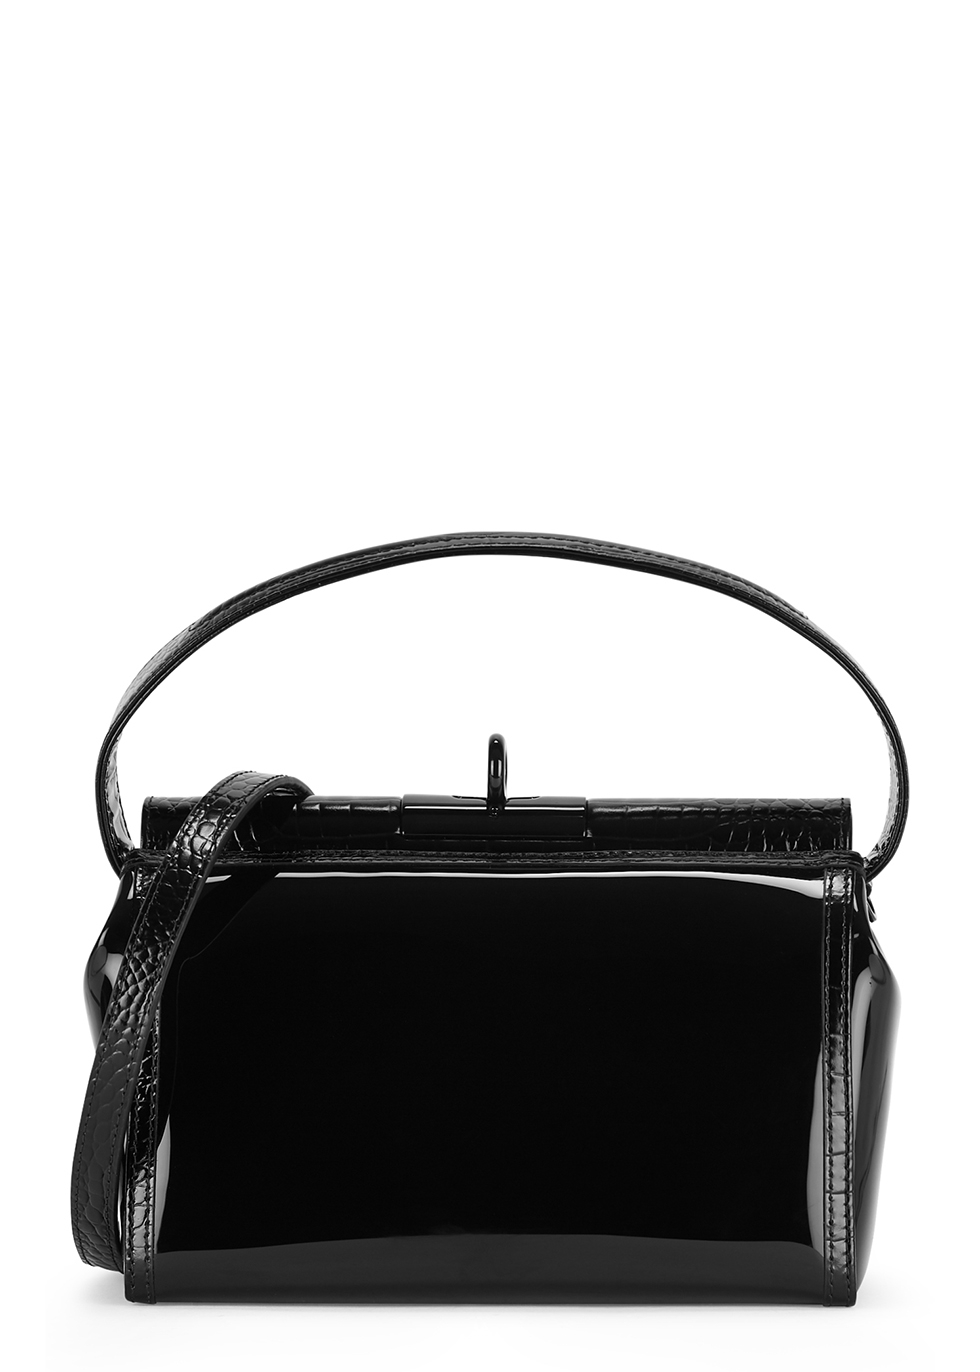 Water black leather and PVC top handle bag